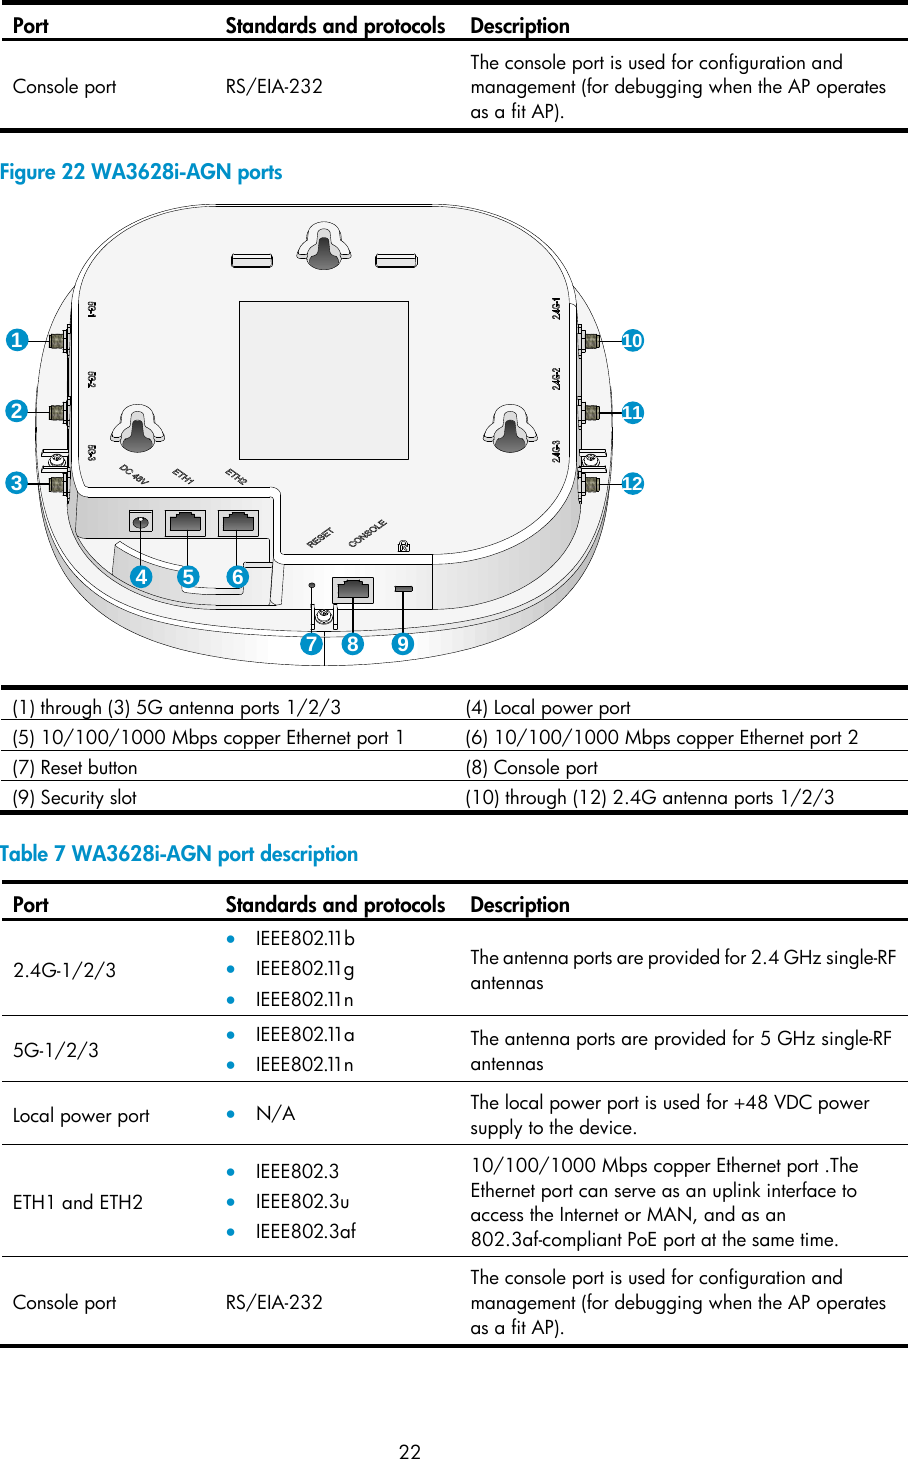  22 Port Standards and protocols Description Console port  RS/EIA-232 The console port is used for configuration and management (for debugging when the AP operates as a fit AP).  Figure 22 WA3628i-AGN ports  (1) through (3) 5G antenna ports 1/2/3 (4) Local power port (5) 10/100/1000 Mbps copper Ethernet port 1  (6) 10/100/1000 Mbps copper Ethernet port 2 (7) Reset button  (8) Console port (9) Security slot  (10) through (12) 2.4G antenna ports 1/2/3  Table 7 WA3628i-AGN port description Port Standards and protocols Description 2.4G-1/2/3 • IEEE802.11b • IEEE802.11g • IEEE802.11n The antenna ports are provided for 2.4 GHz single-RF antennas 5G-1/2/3 • IEEE802.11a • IEEE802.11n The antenna ports are provided for 5 GHz single-RF antennas Local power port  • N/A  The local power port is used for +48 VDC power supply to the device. ETH1 and ETH2 • IEEE802.3 • IEEE802.3u • IEEE802.3af 10/100/1000 Mbps copper Ethernet port .The Ethernet port can serve as an uplink interface to access the Internet or MAN, and as an 802.3af-compliant PoE port at the same time. Console port  RS/EIA-232 The console port is used for configuration and management (for debugging when the AP operates as a fit AP). 1234 5 67 8 9101112